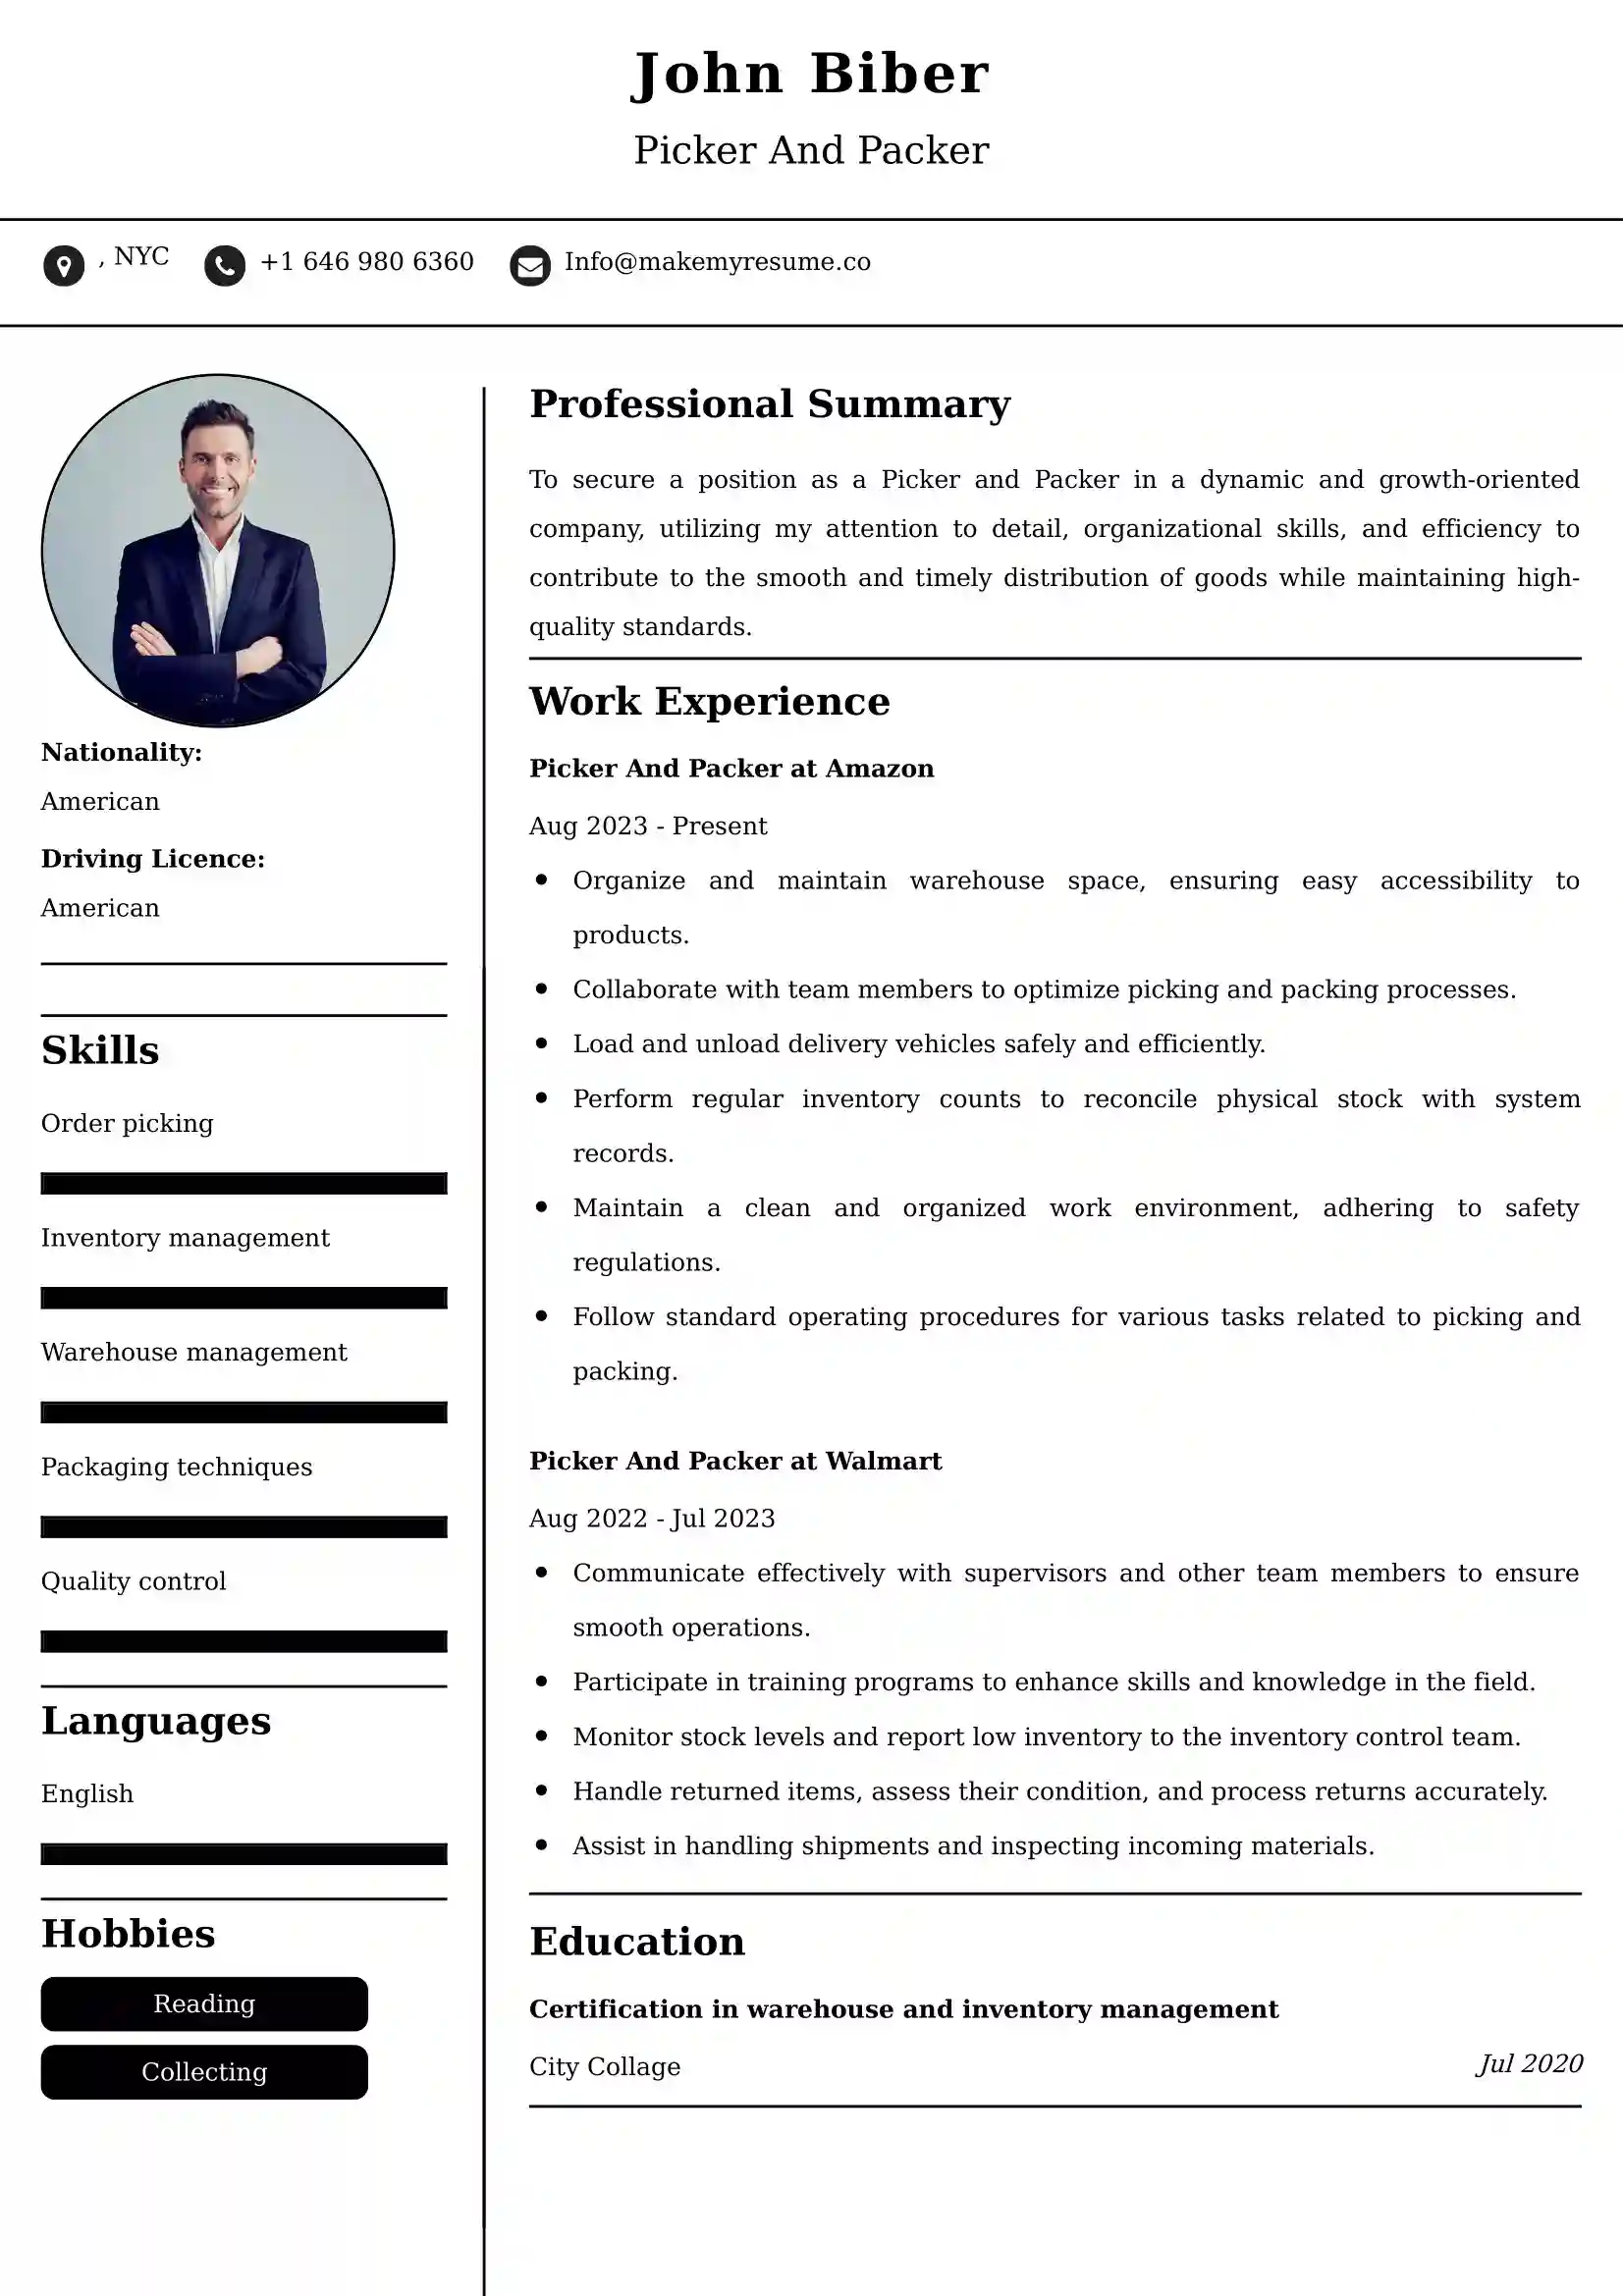 Picker And Packer Resume Examples for UK Jobs - Tips and Guide